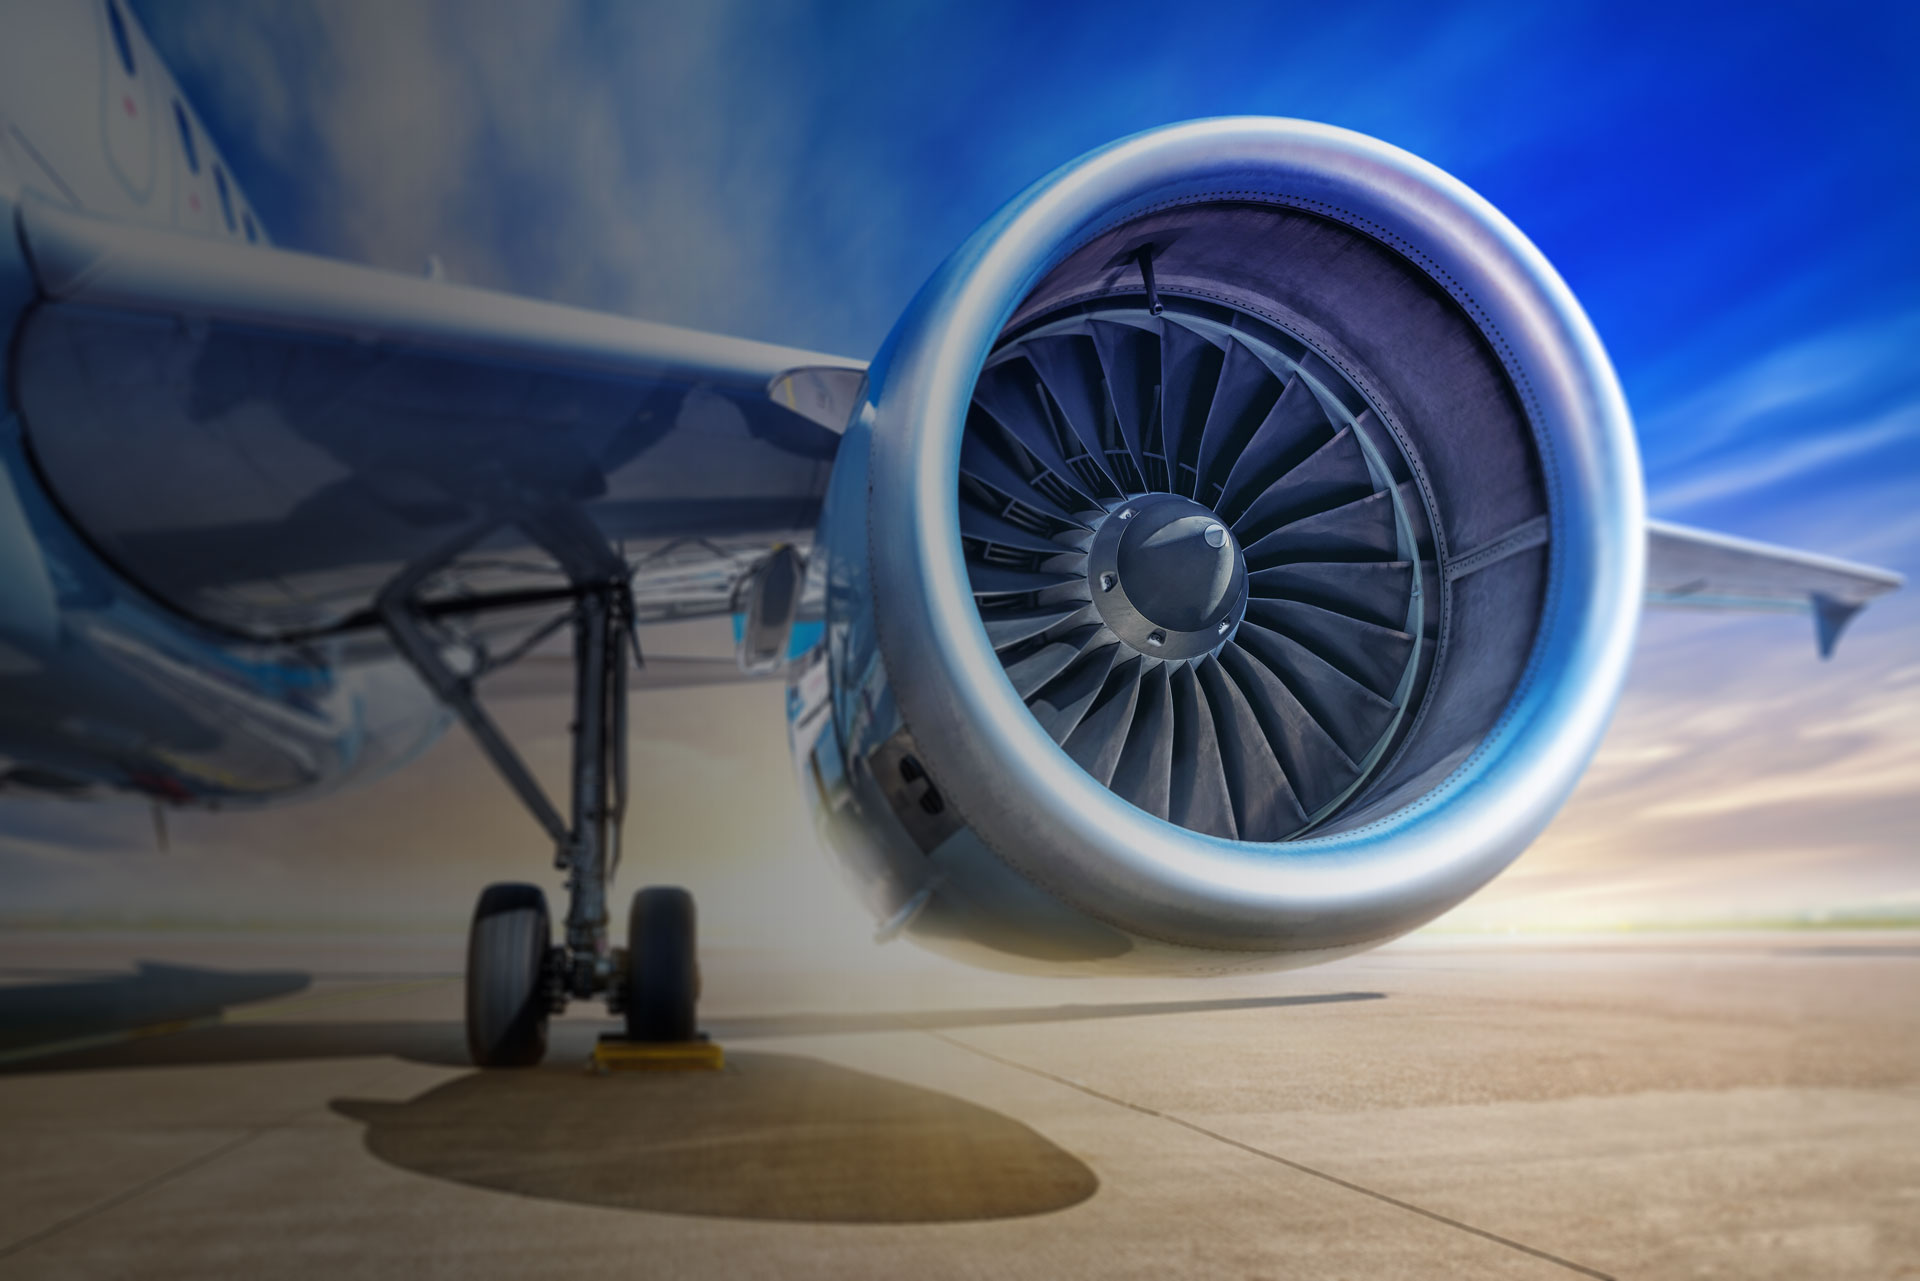  Dynamic Optimization of Inventory Management in Aerospace Manufacturing - IoT ONE Case Study